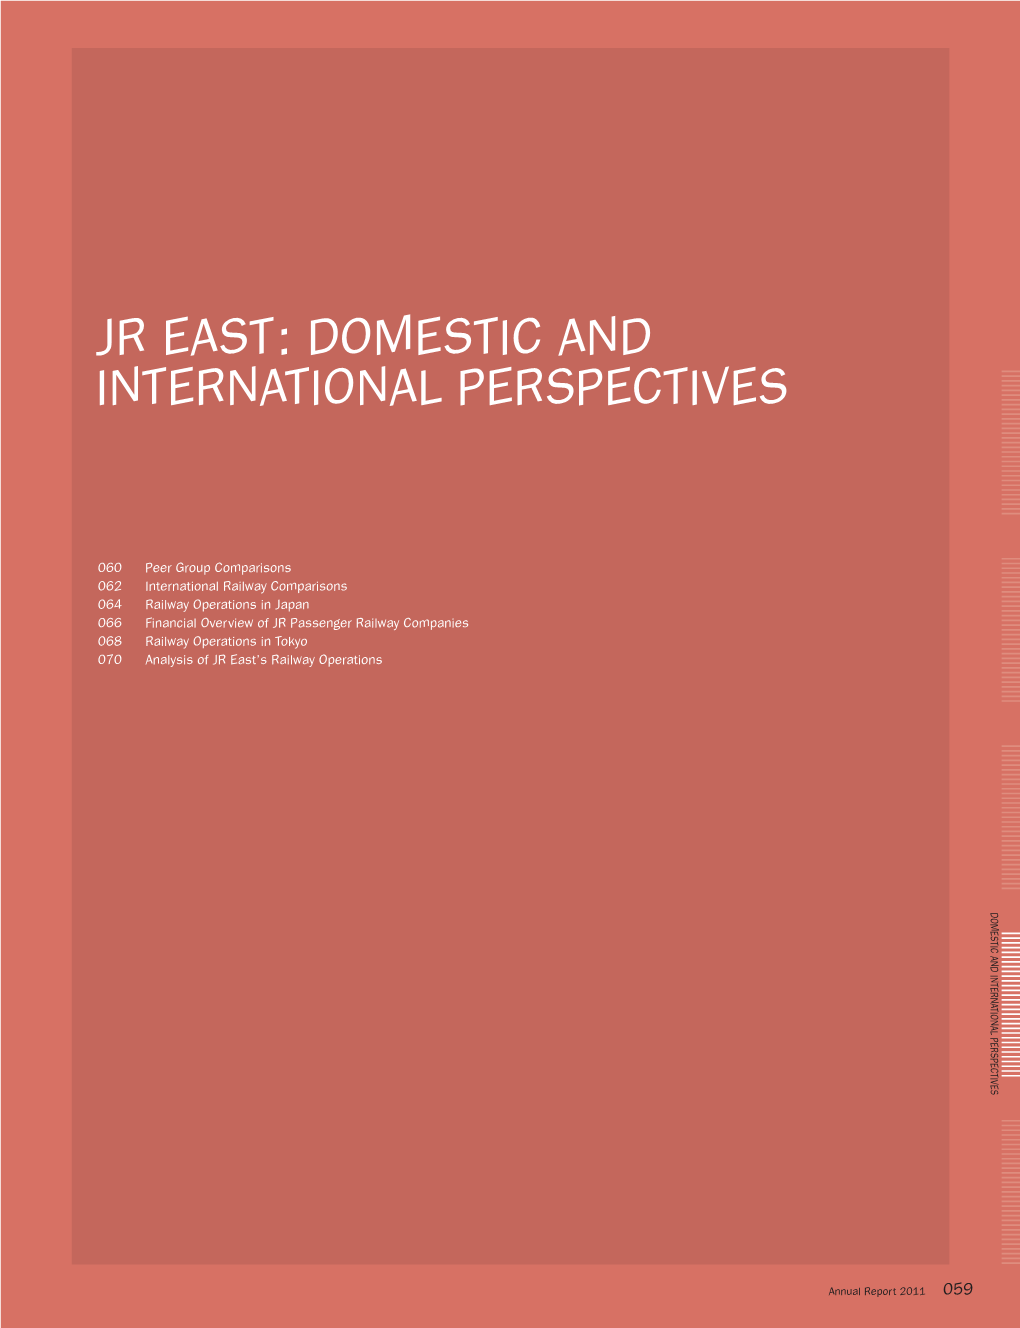 JR East: Domestic and International Perspectives